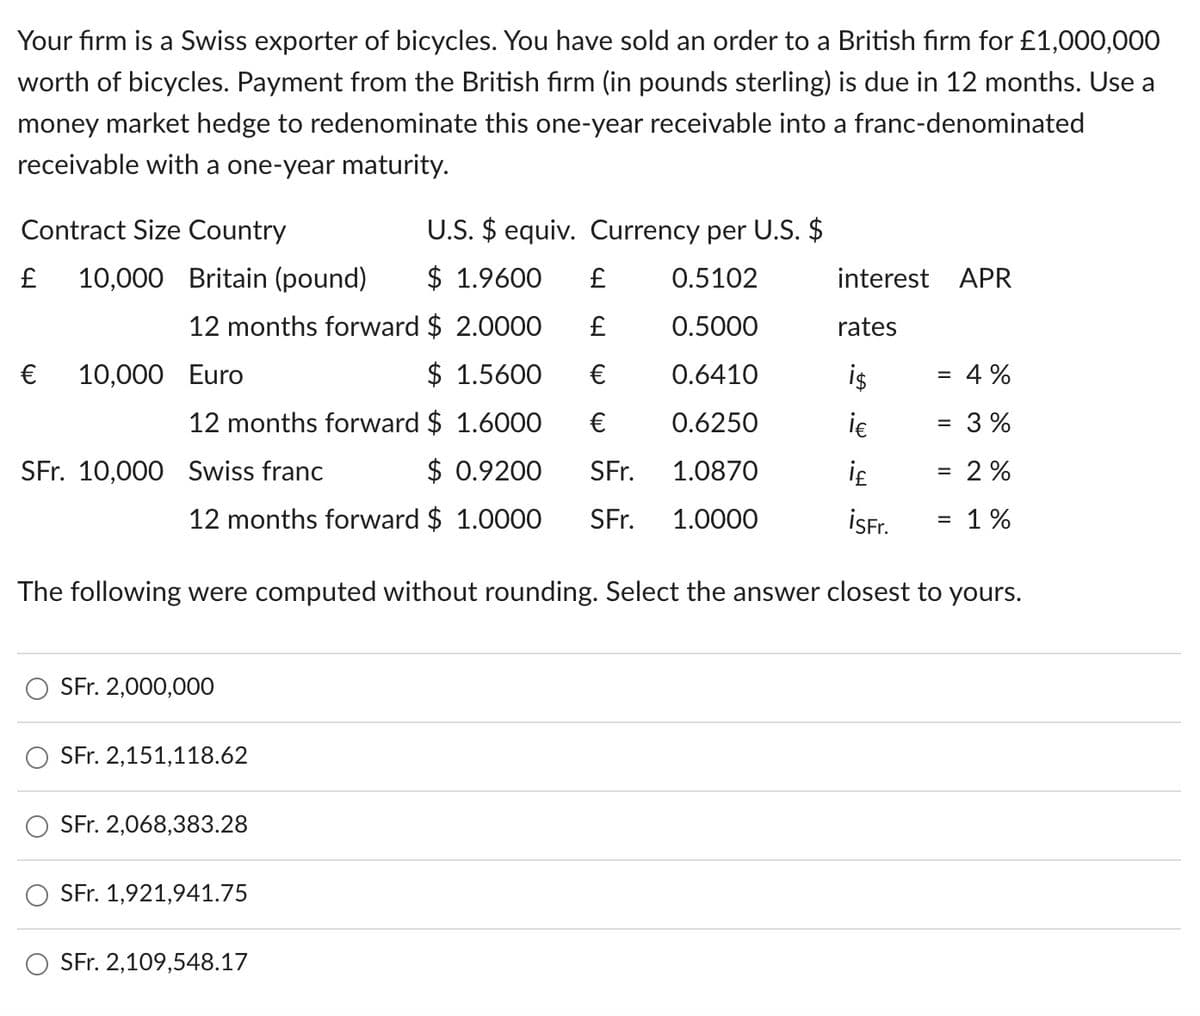 Your firm is a Swiss exporter of bicycles. You have sold an order to a British firm for £1,000,000
worth of bicycles. Payment from the British firm (in pounds sterling) is due in 12 months. Use a
money market hedge to redenominate this one-year receivable into a franc-denominated
receivable with a one-year maturity.
U.S. $ equiv. Currency per U.S. $
Contract Size Country
£
10,000 Britain (pound)
$ 1.9600
£
0.5102
interest APR
12 months forward $ 2.0000 £
0.5000
rates
€
10,000 Euro
$ 1.5600
€
0.6410
i$
= 4%
12 months forward $ 1.6000
€
0.6250
i€
= 3%
SFr. 10,000 Swiss franc
$ 0.9200
SFr.
1.0870
i₤
= 2%
12 months forward $ 1.0000 SFr.
1.0000
isFr.
= 1%
The following were computed without rounding. Select the answer closest to yours.
SFr. 2,000,000
SFr. 2,151,118.62
SFr. 2,068,383.28
SFr. 1,921,941.75
SFr. 2,109,548.17